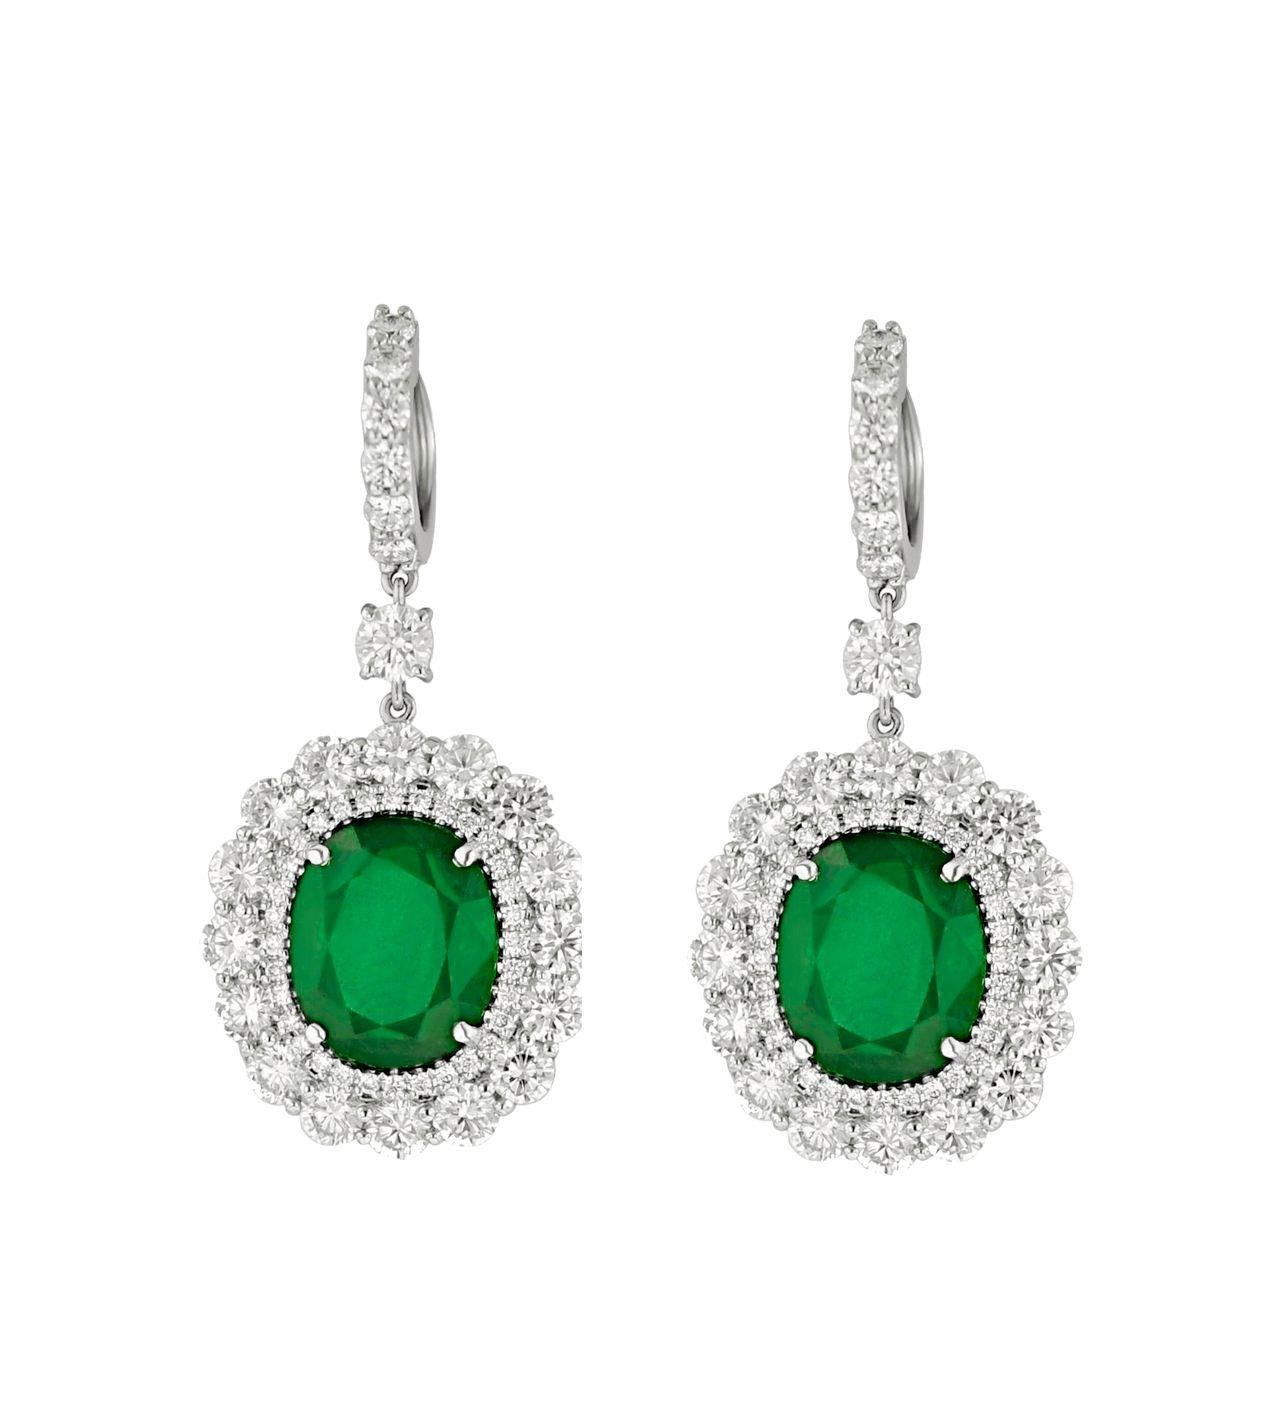 18 kt white gold emerald earrings featuring center 9.21 cts tw GIA certified green oval shaped emeralds surrounded by 6.00 cts tw of round diamonds set all the way around 